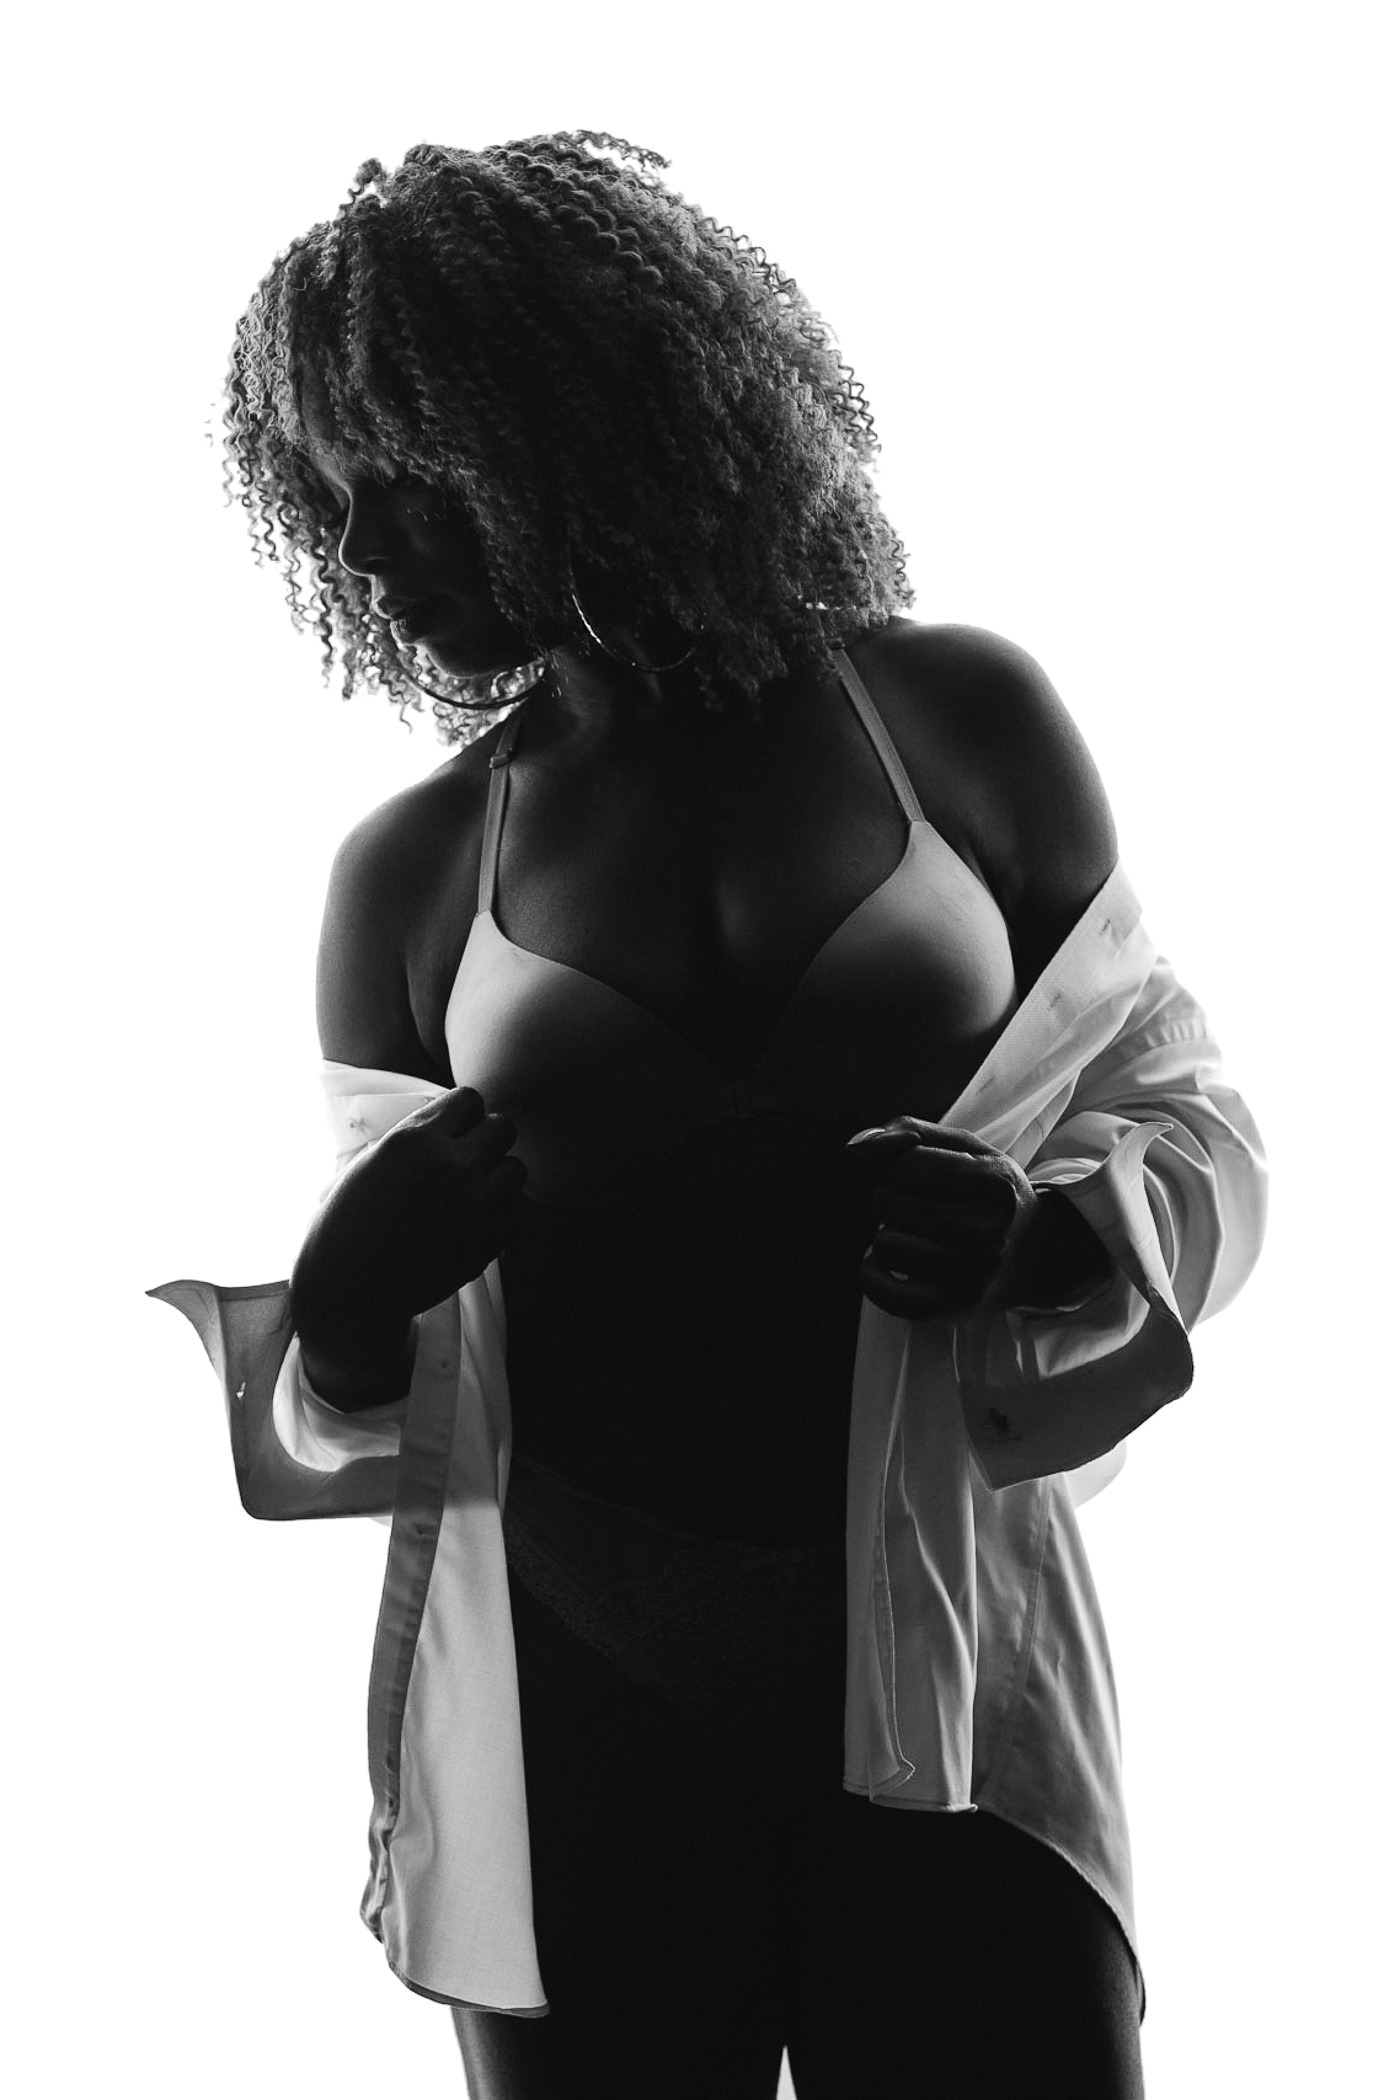 Gorgeous African American woman with amazing hair standing in partial silhouette while pulling boyfriend's white work shirt around her body and off her shoulders